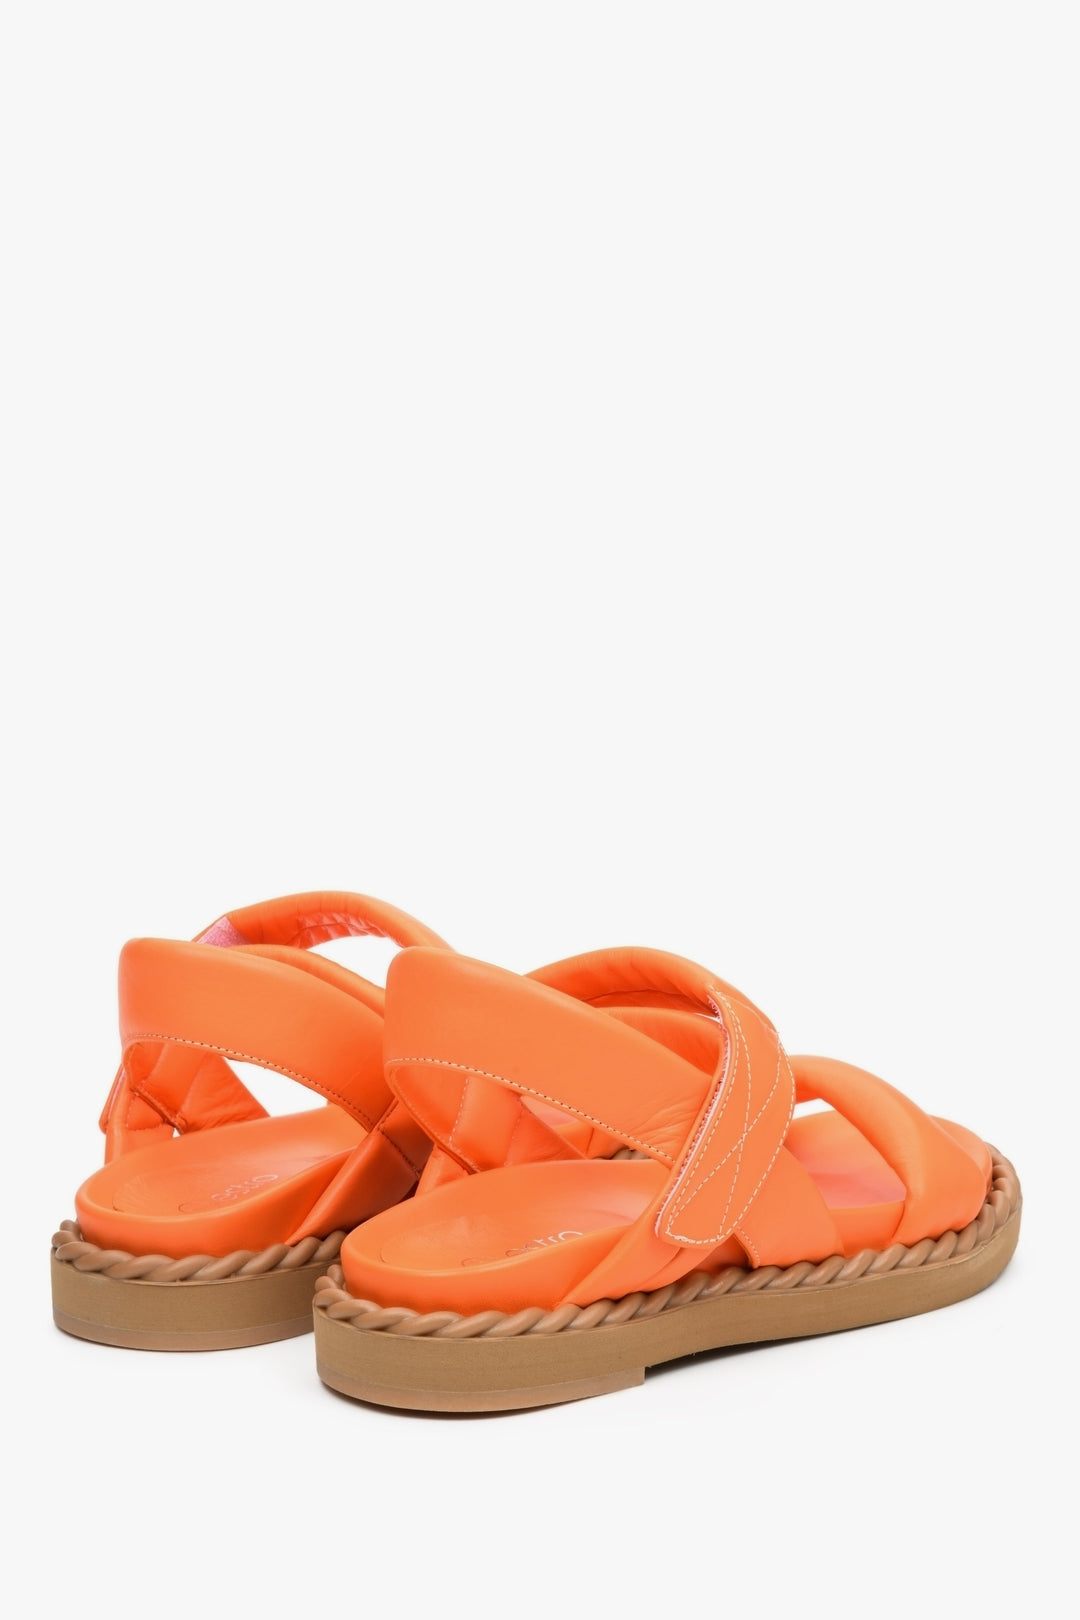 Women's orange flat sandals for summer on a comfortable, flexible sole - the presentation of the back and side of the shoes.